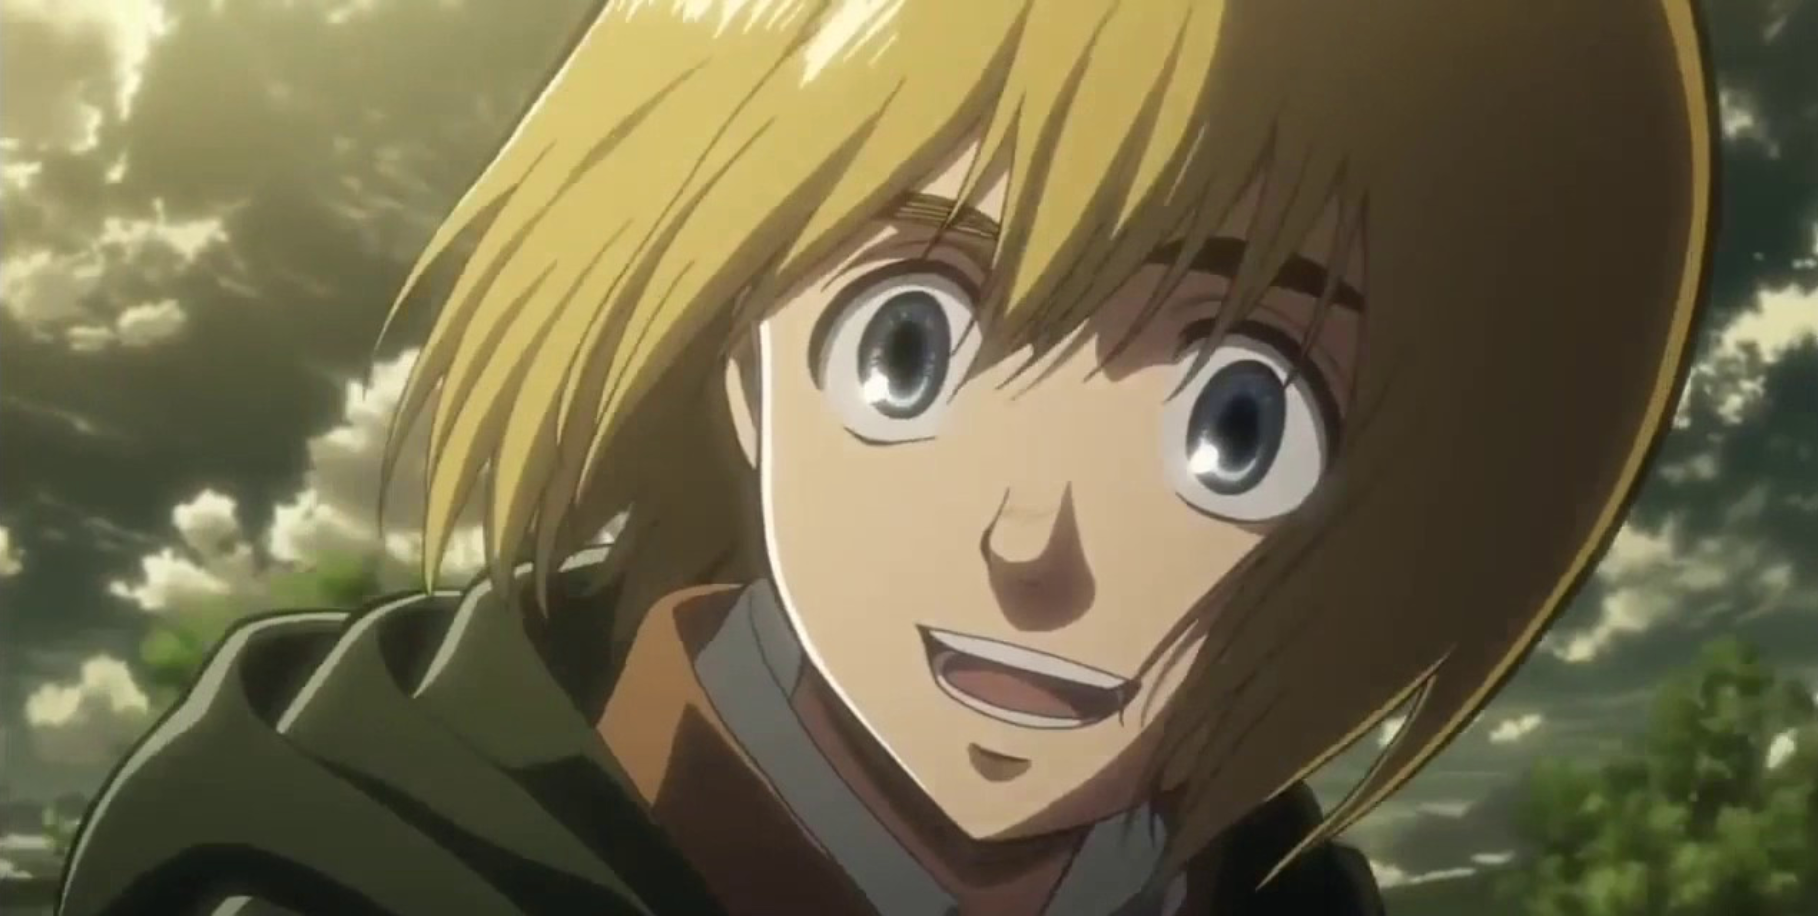 Armin being happy